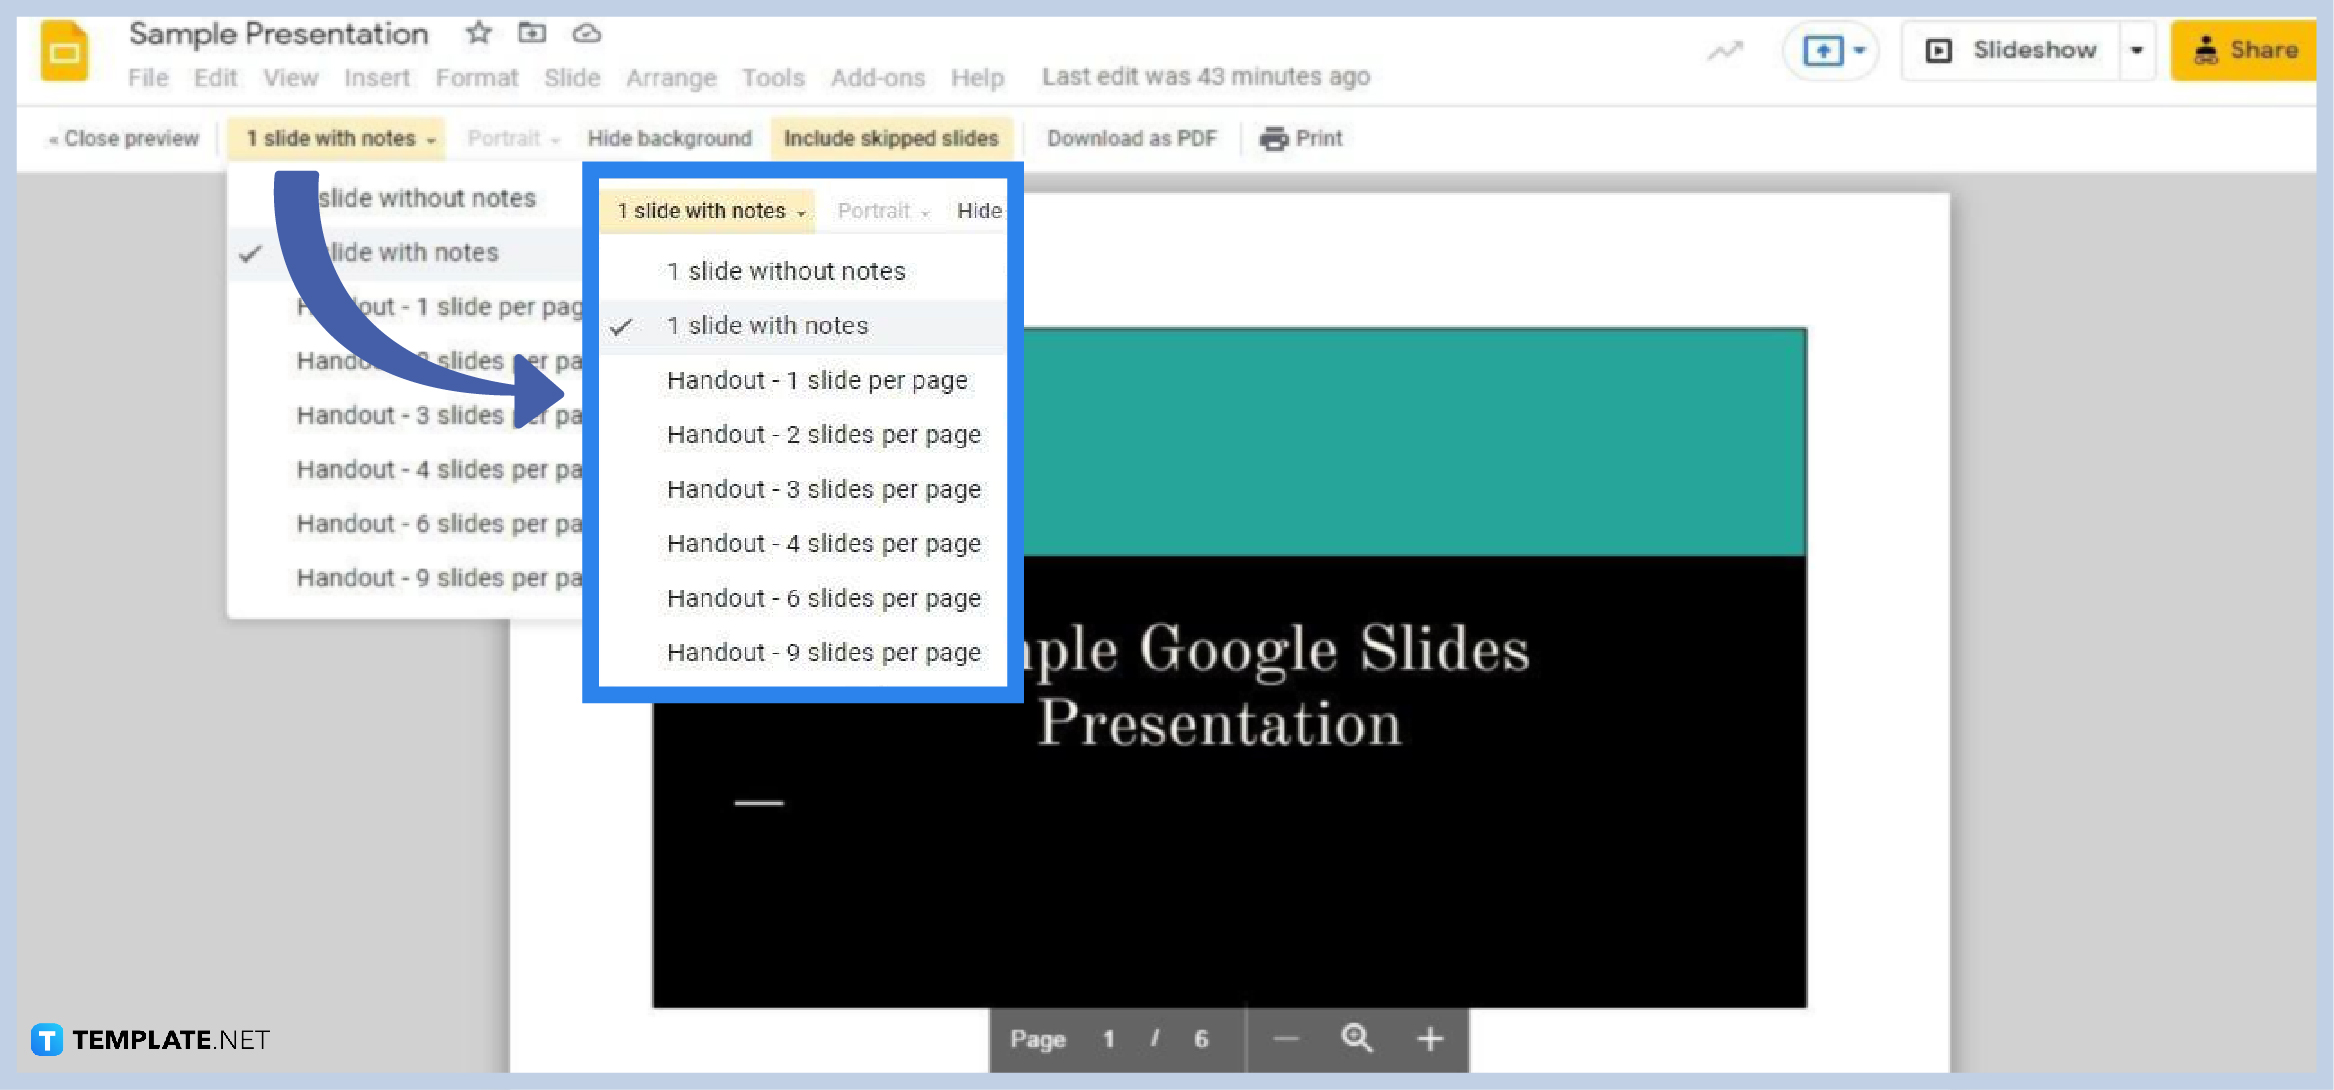 how-to-export-convert-download-google-slides-as-pdf-step-3